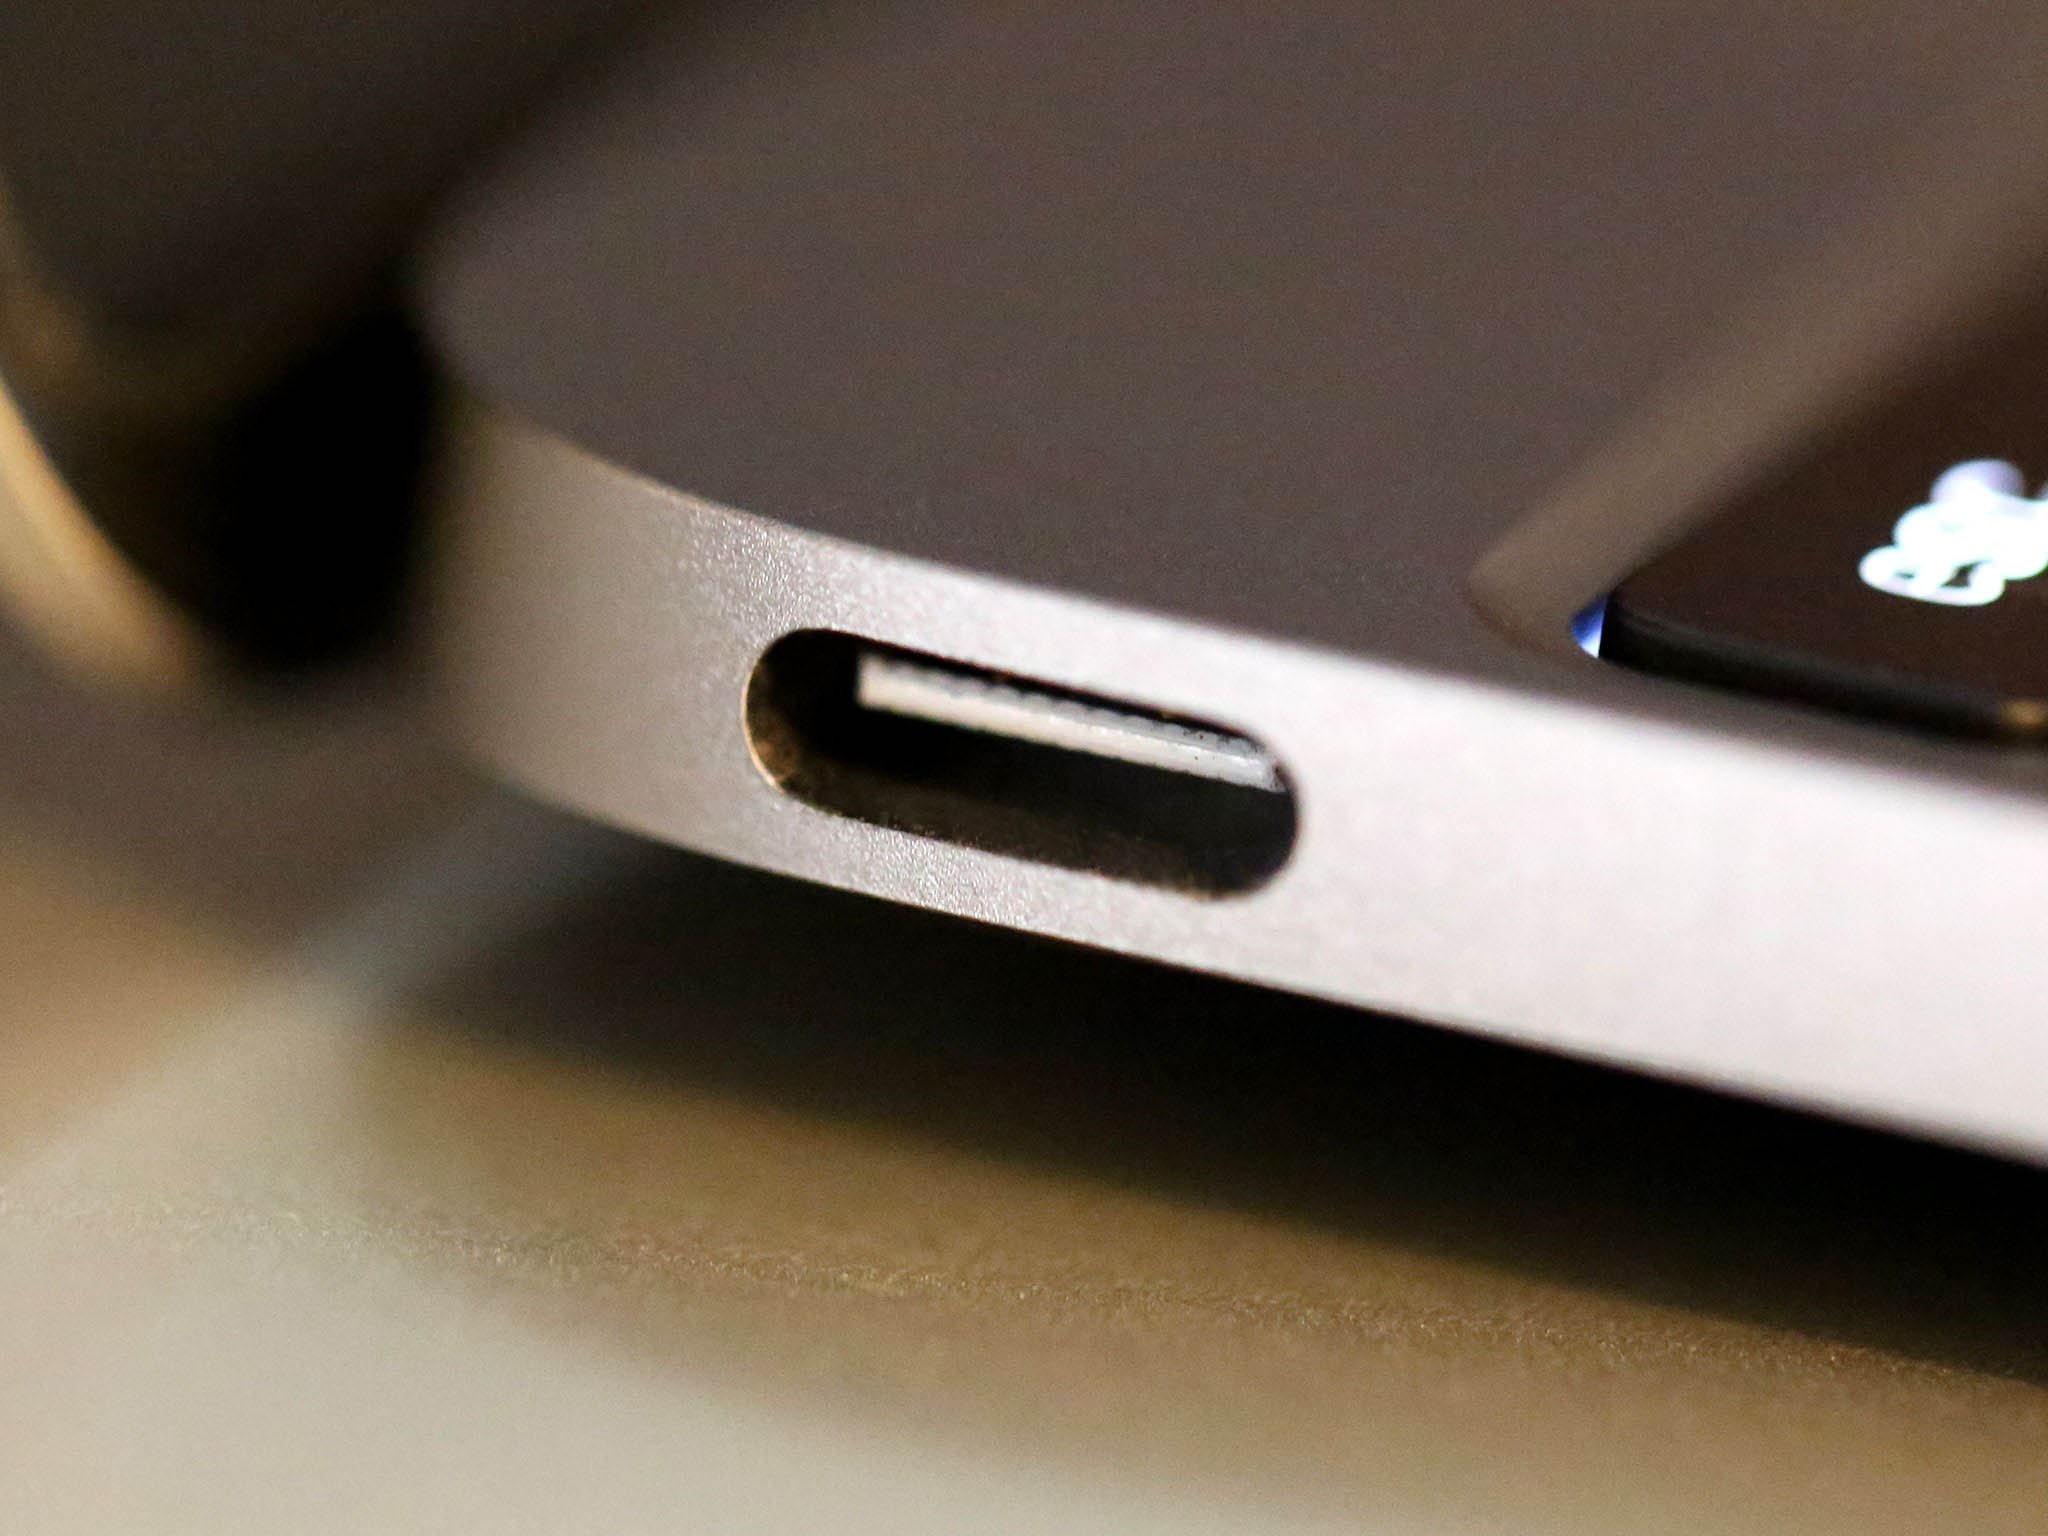 The future of Thunderbolt is USB-C, and this is a good 